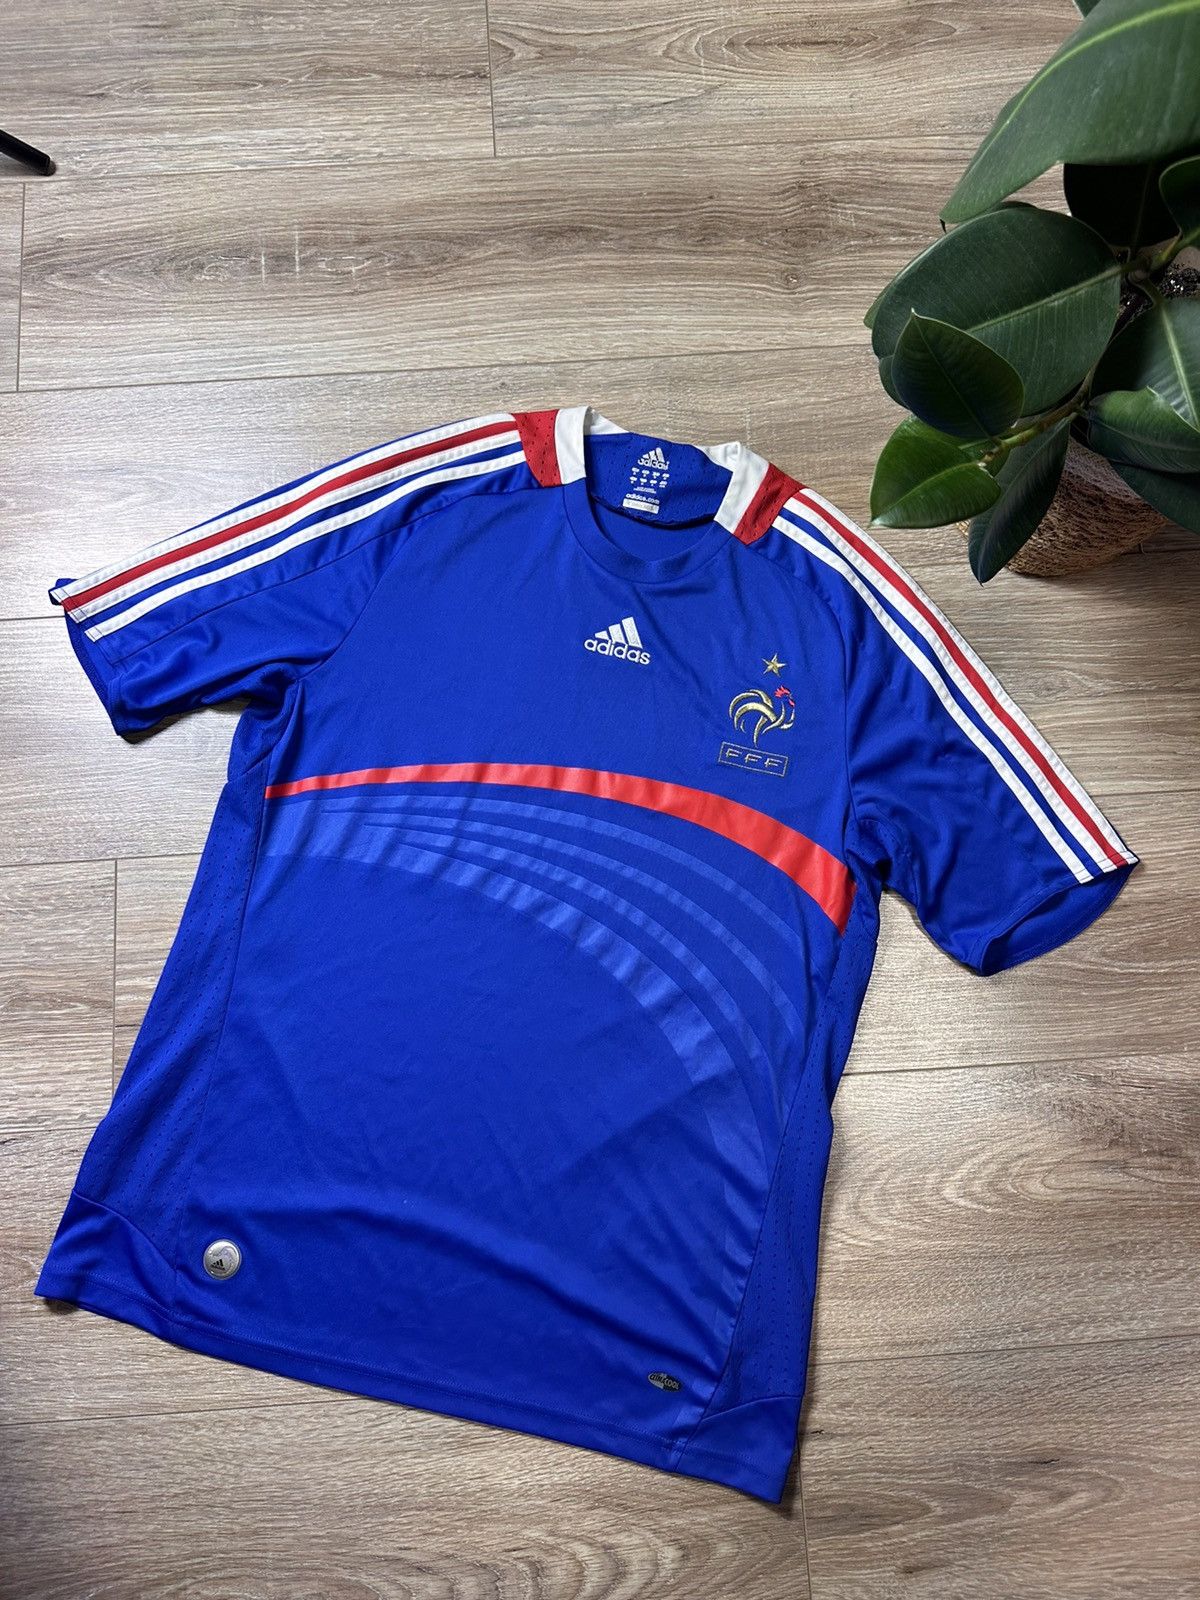 Pre-owned Adidas X Fifa World Cup France Jersey Home Football Shirt 2007 - 2008 Adidas 620139 In Blue